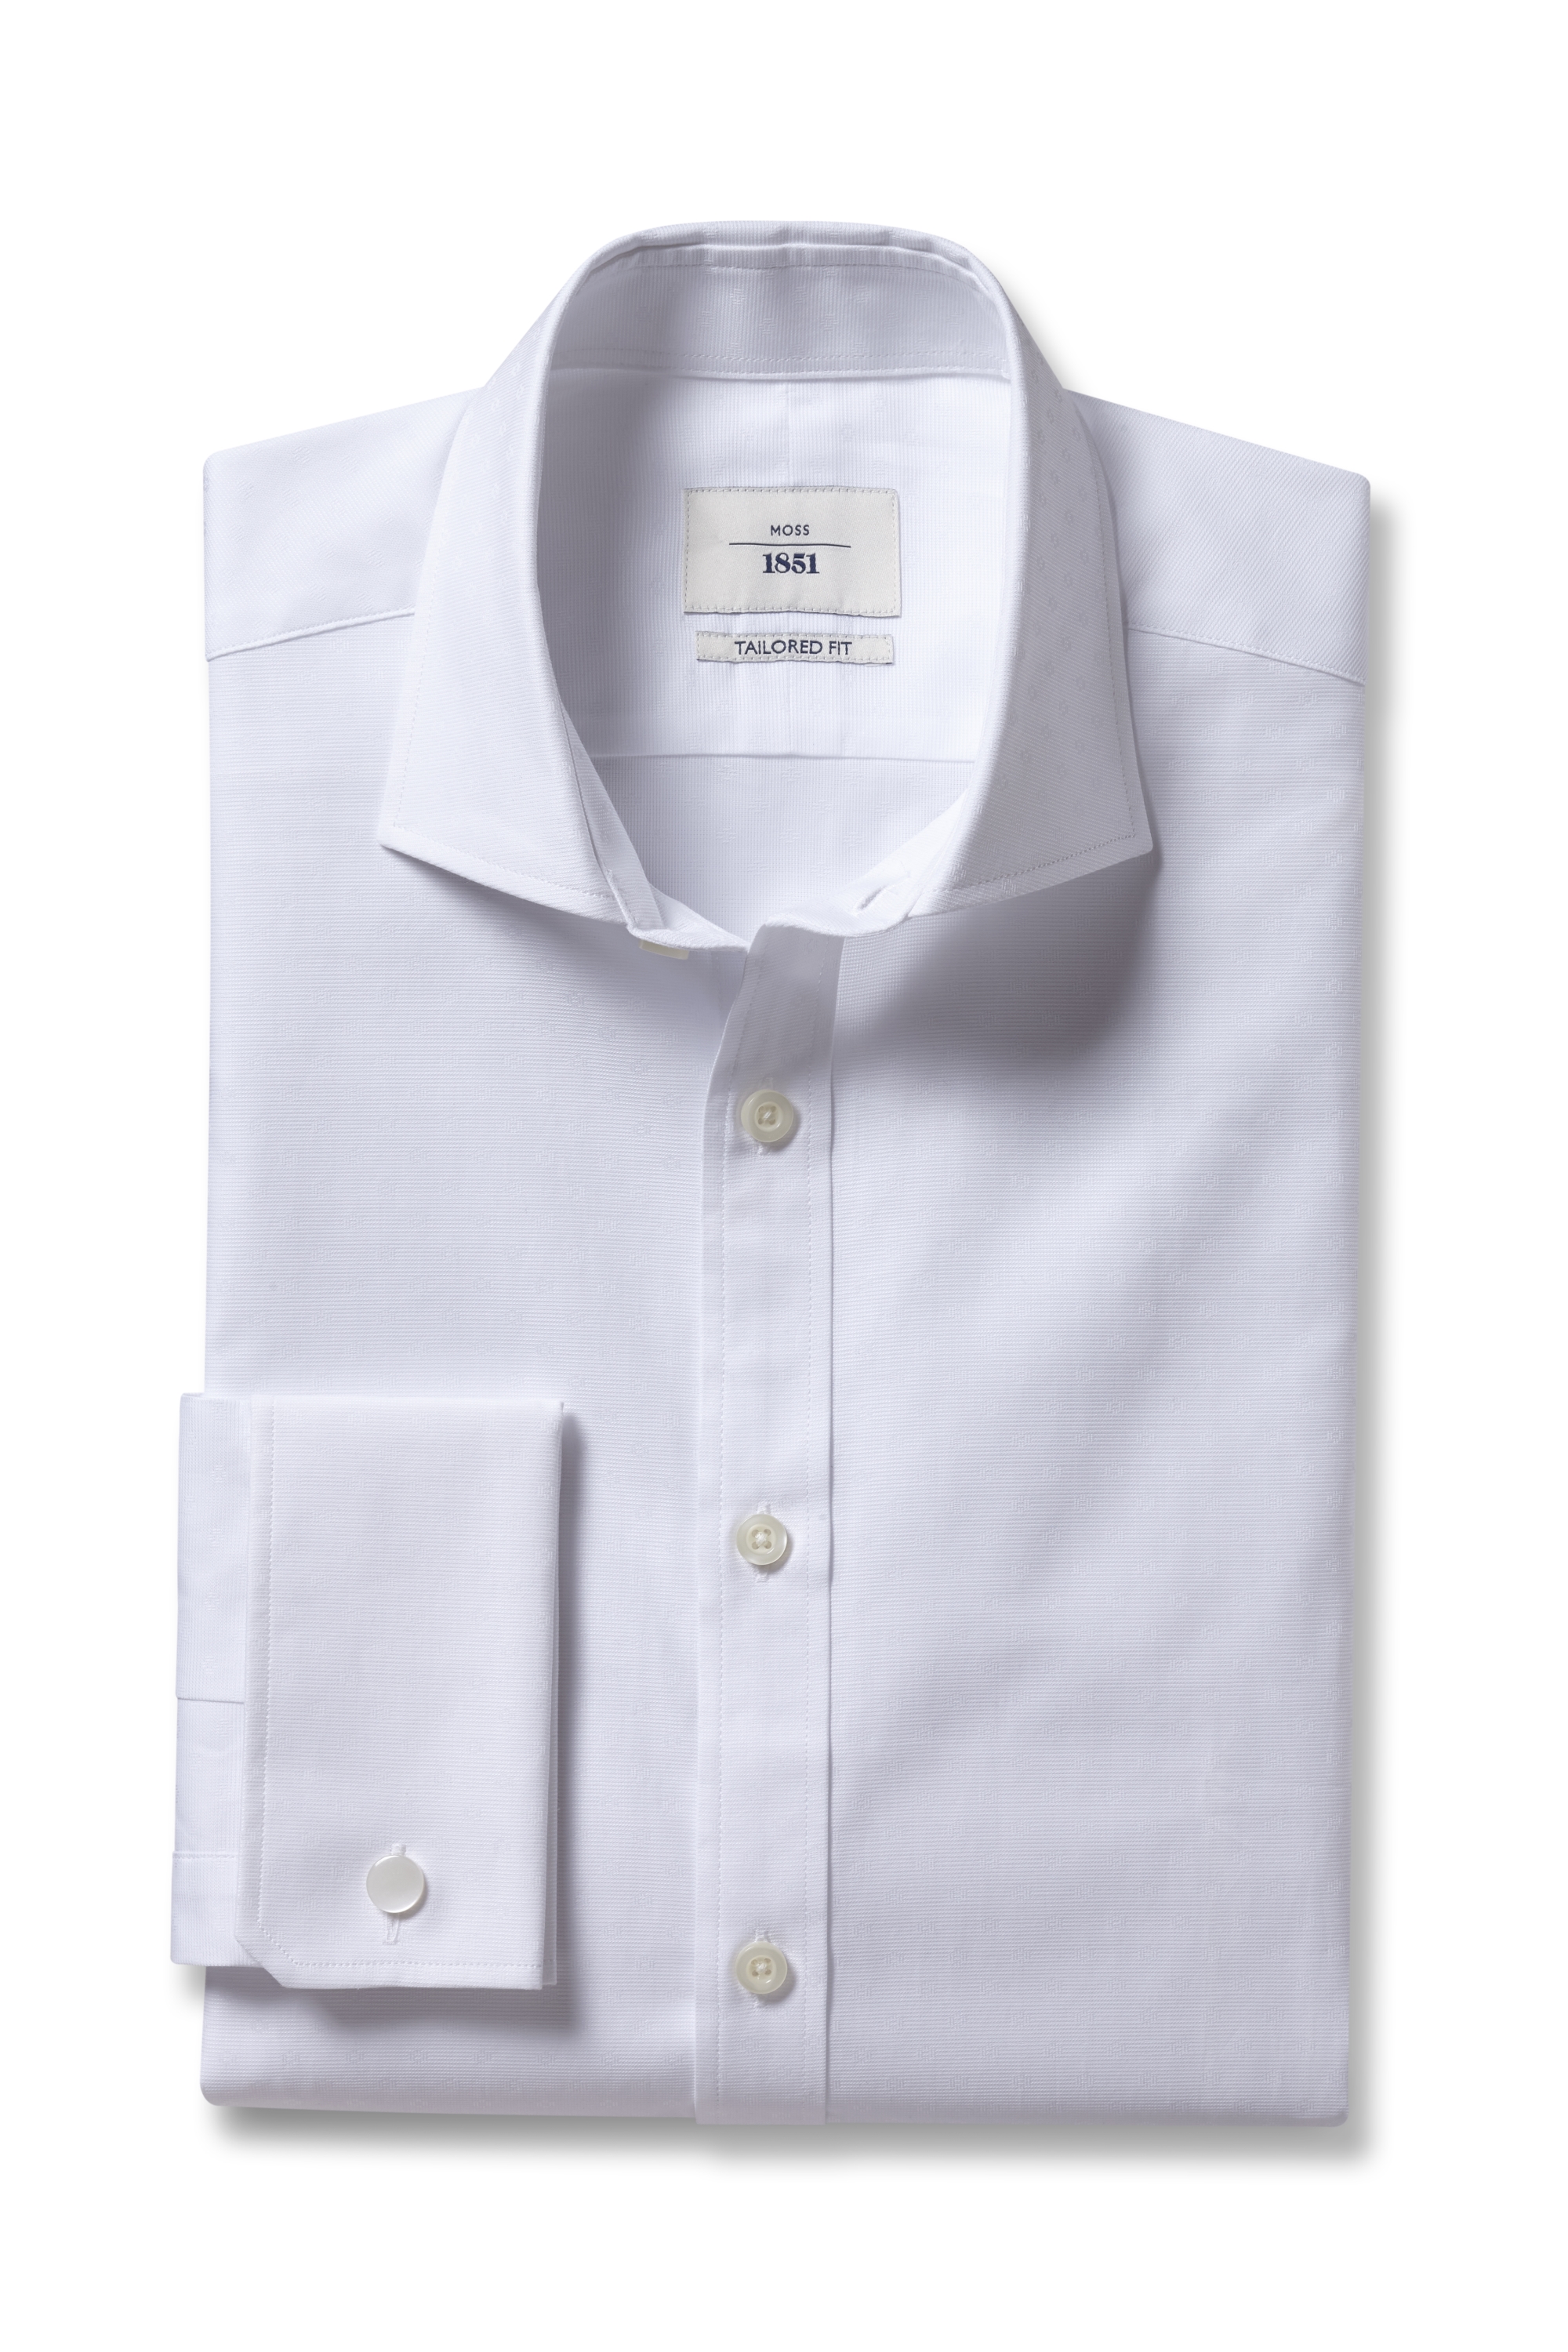 Tailored Fit White Dobby Double Cuff Shirt | Buy Online at Moss